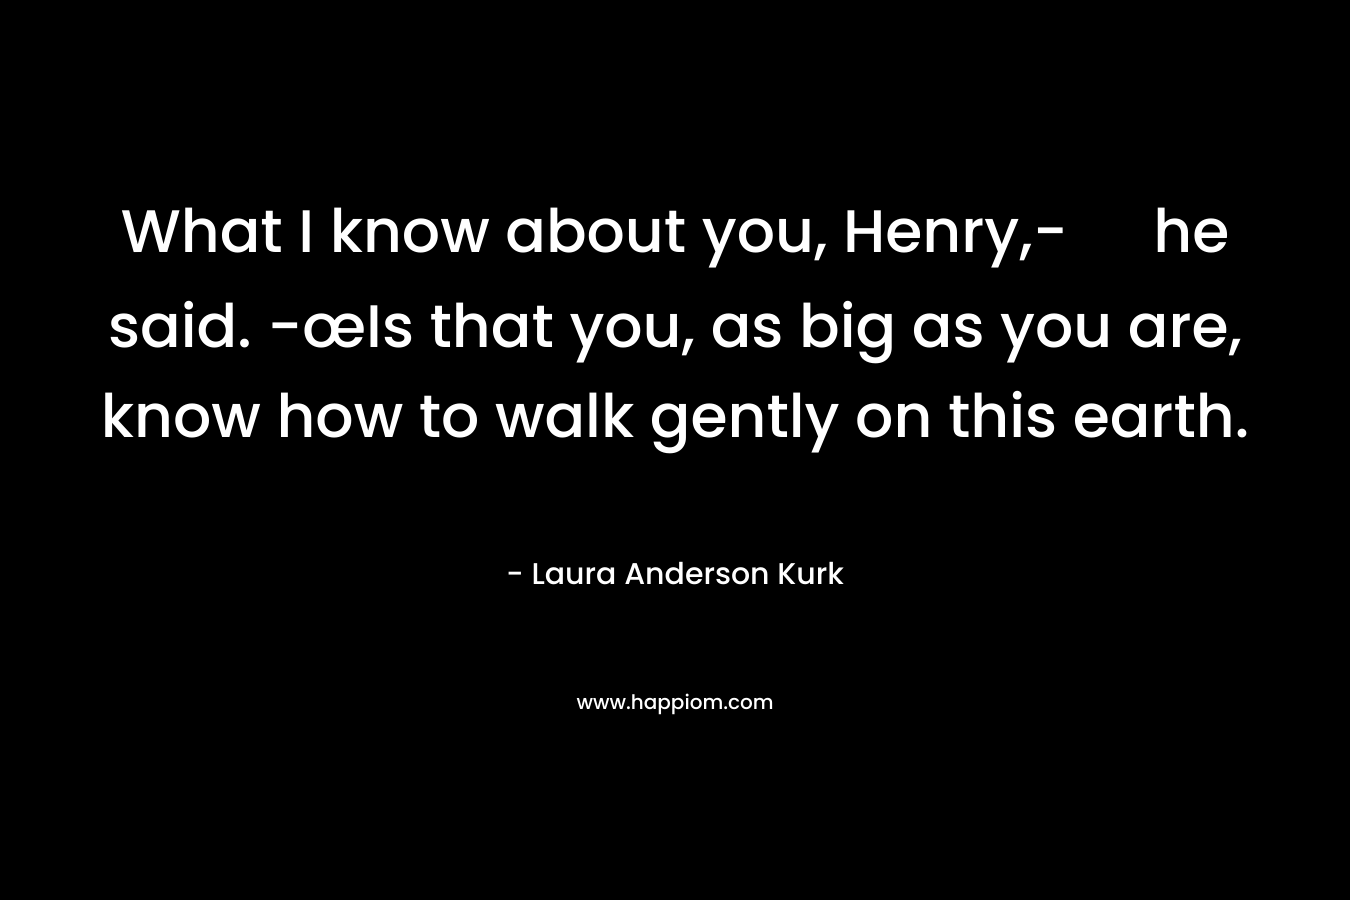 What I know about you, Henry,- he said. -œIs that you, as big as you are, know how to walk gently on this earth.